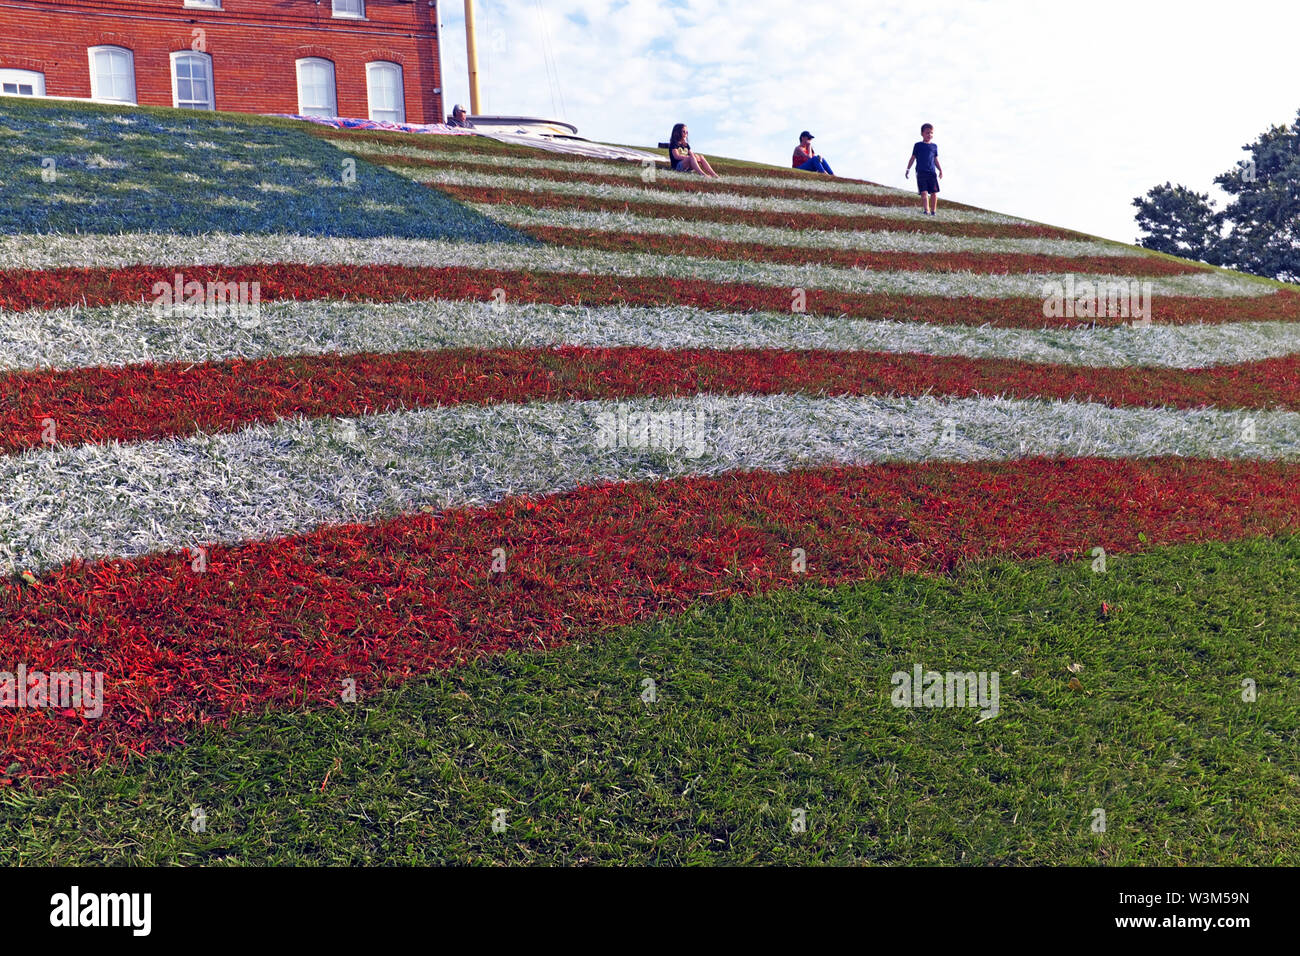 A giant US flag is painted into a hillside in Fairport Harbor, Ohio, USA during Fourth of July festivities. Stock Photo